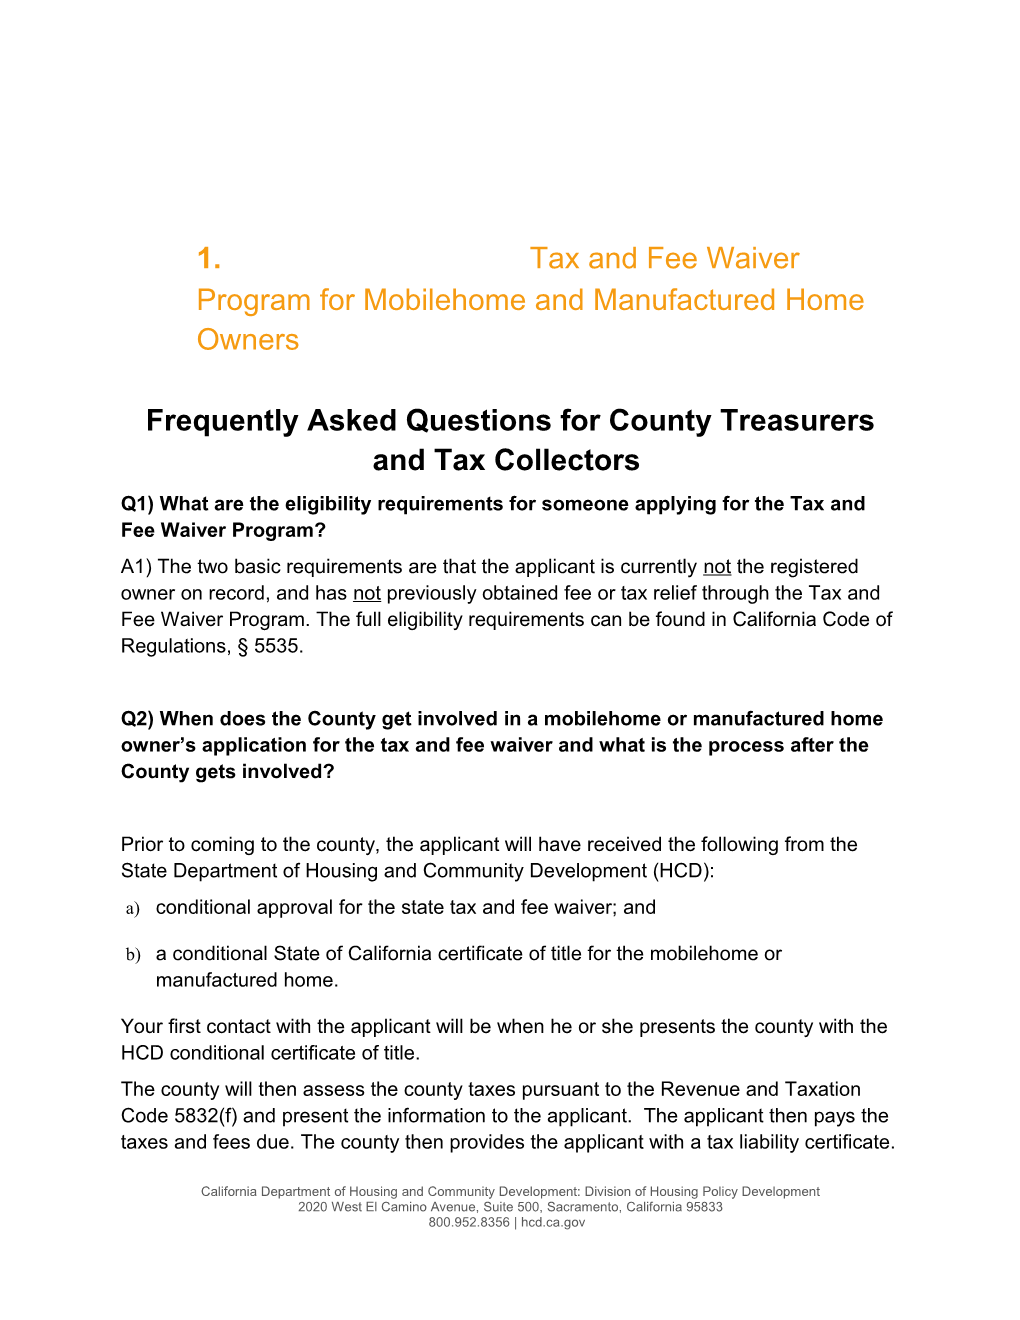 Frequently Asked Questions for County Treasurers and Tax Collectors